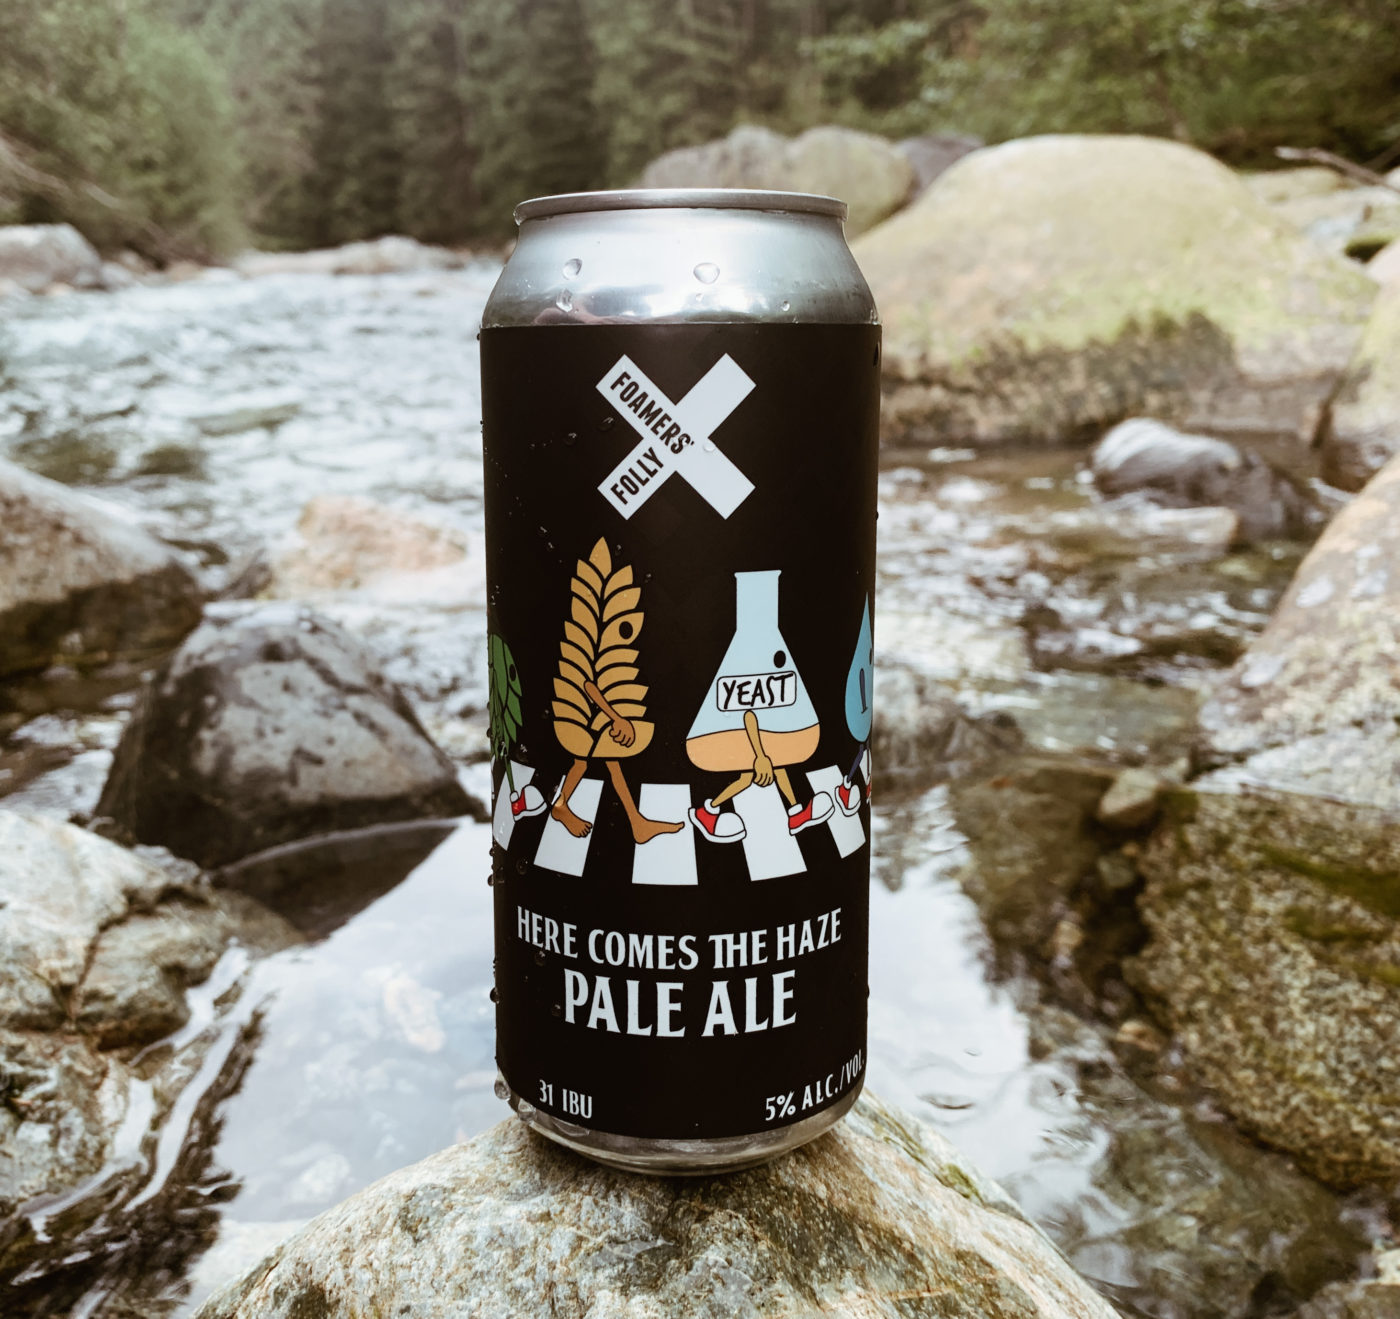 NEW RELEASE: Here Comes the Haze Pale Ale